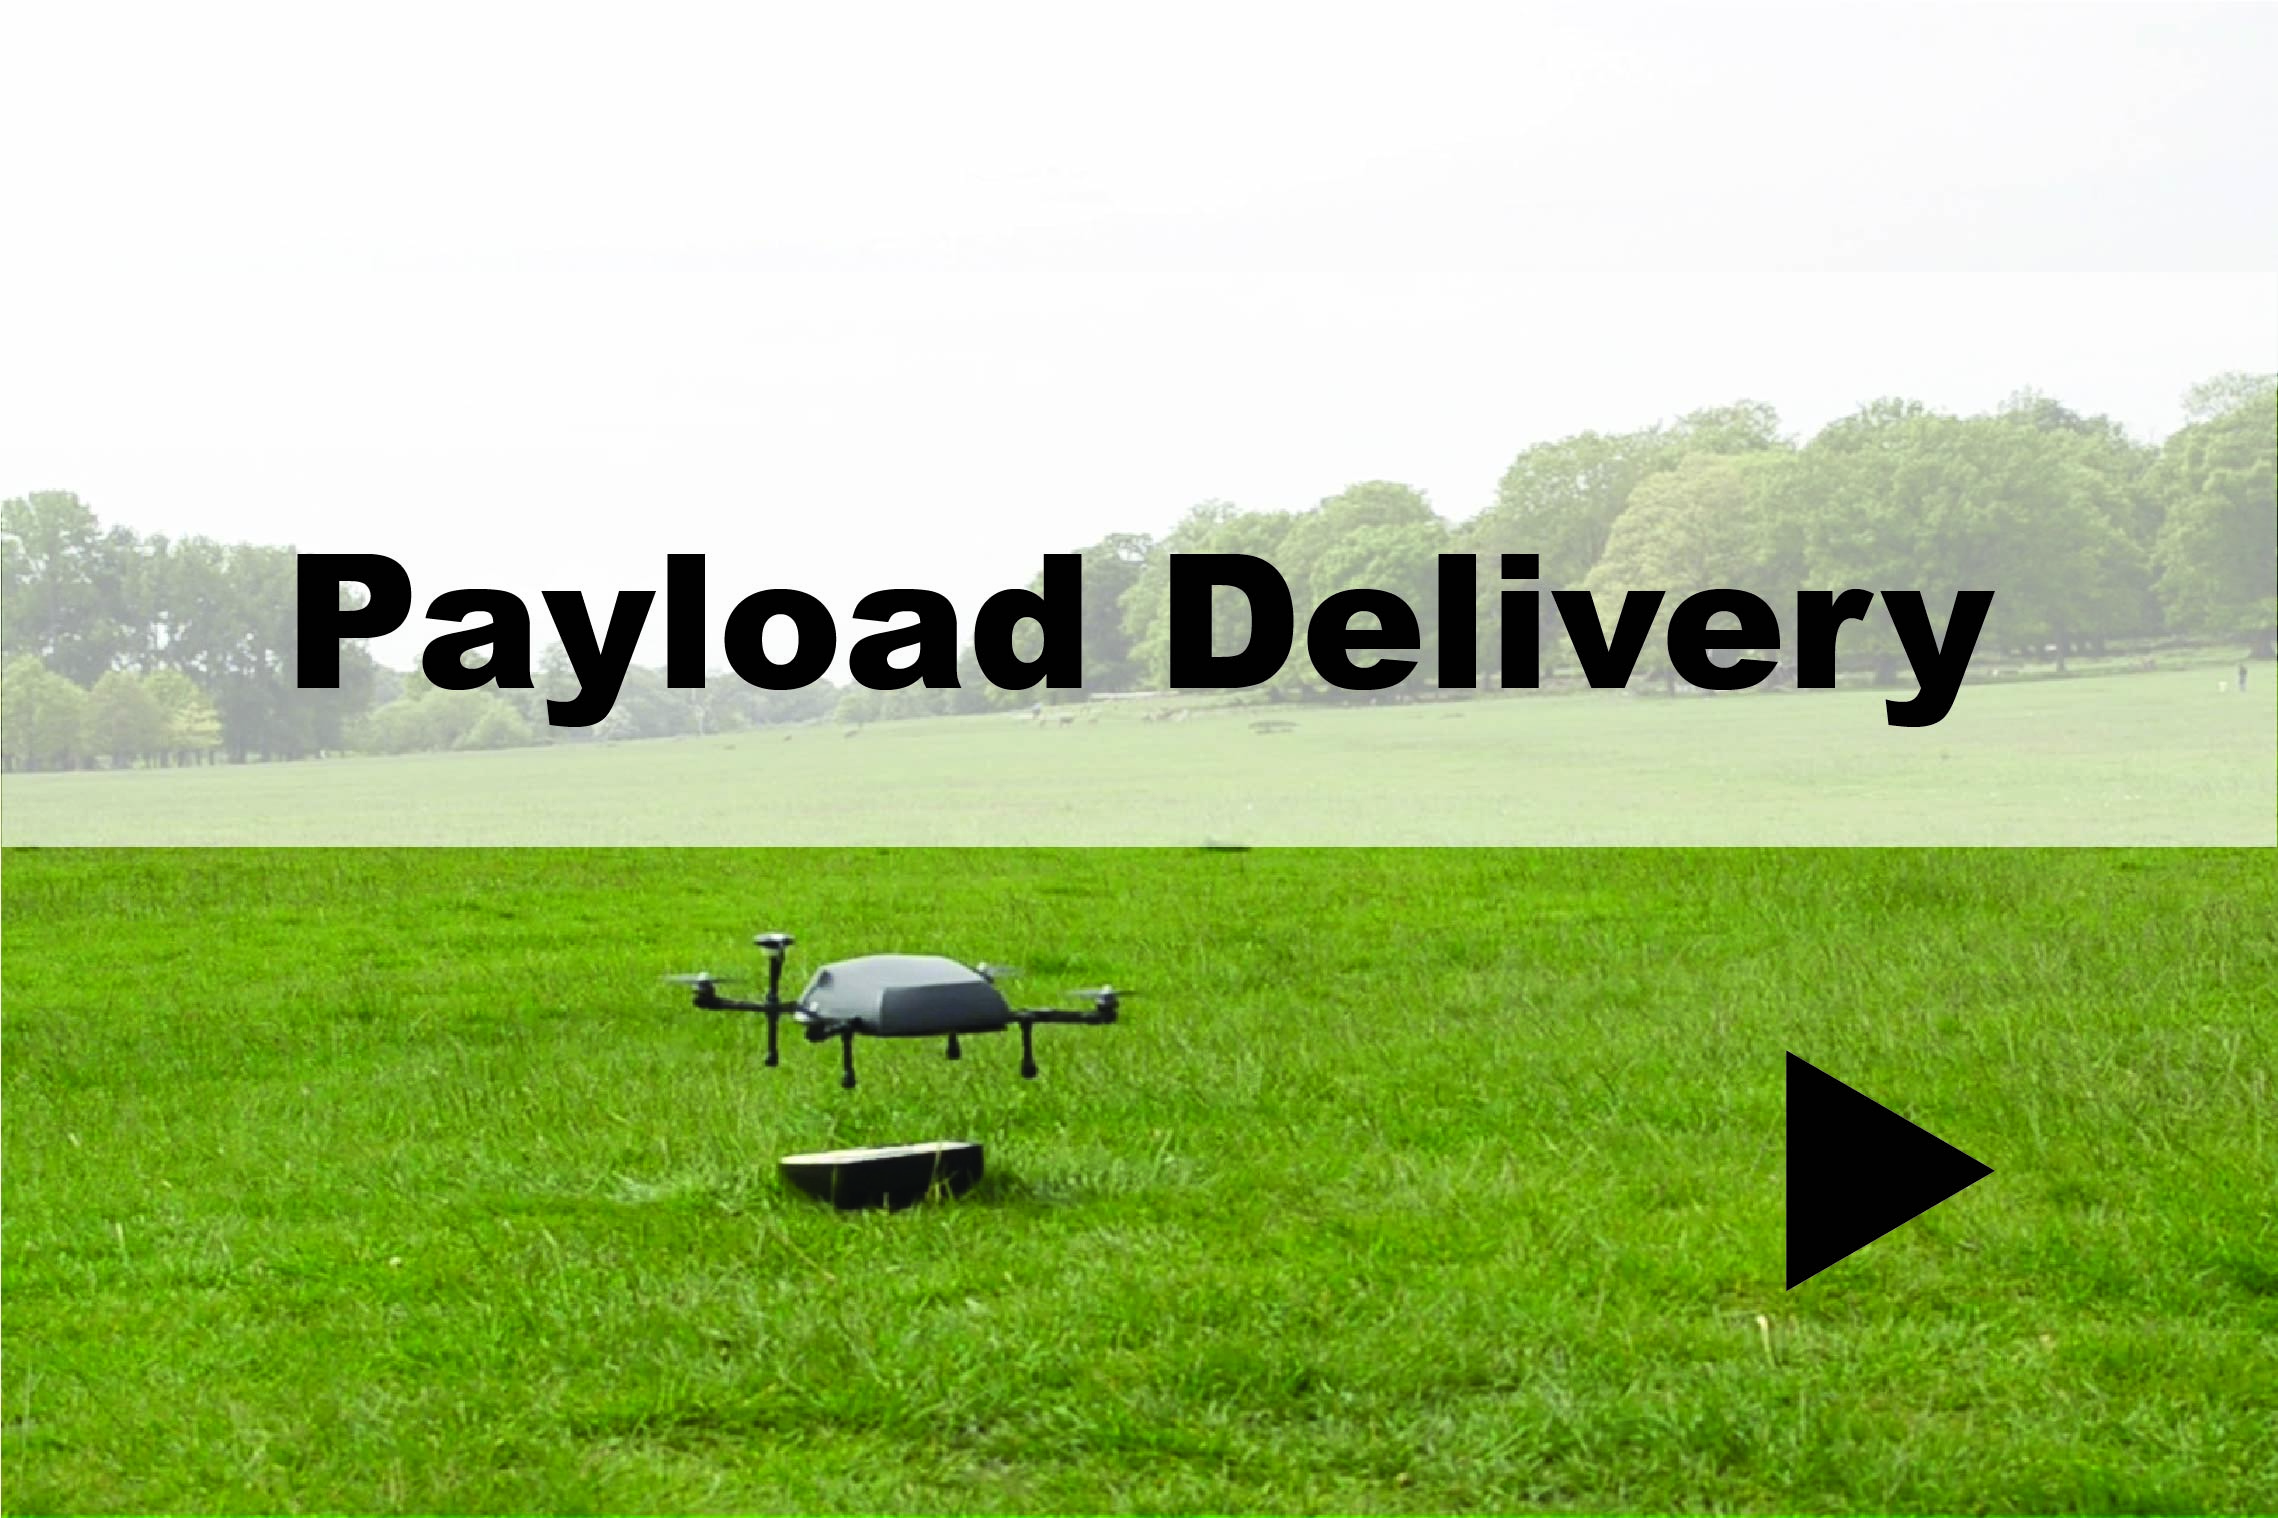 Payload delivery demo